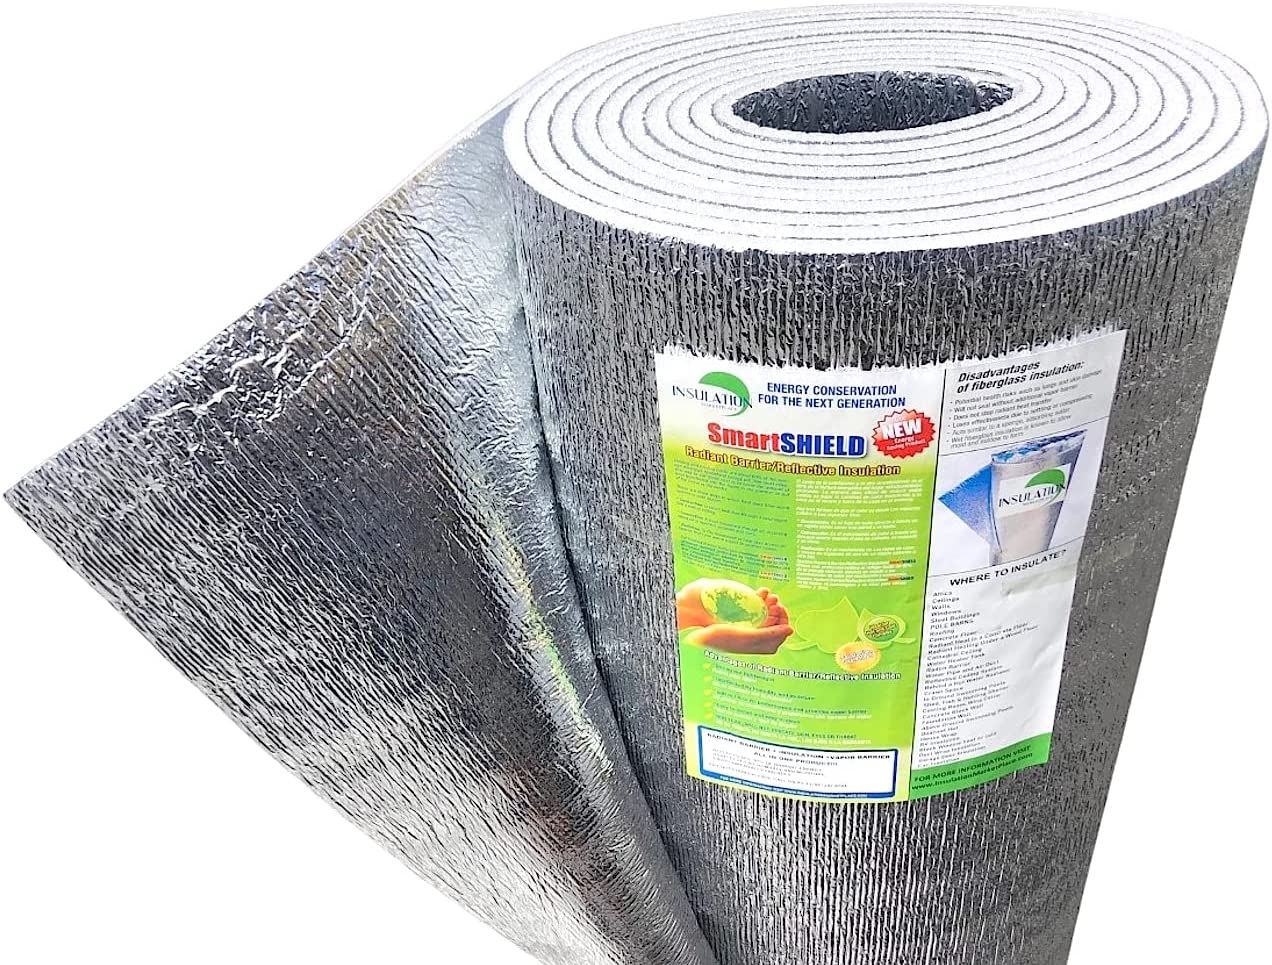 SmartSHIELD -10mm Reflective Insulation roll, Foam Core Radiant Barrier,  Thermal Insulation Shield - Engineered Foil